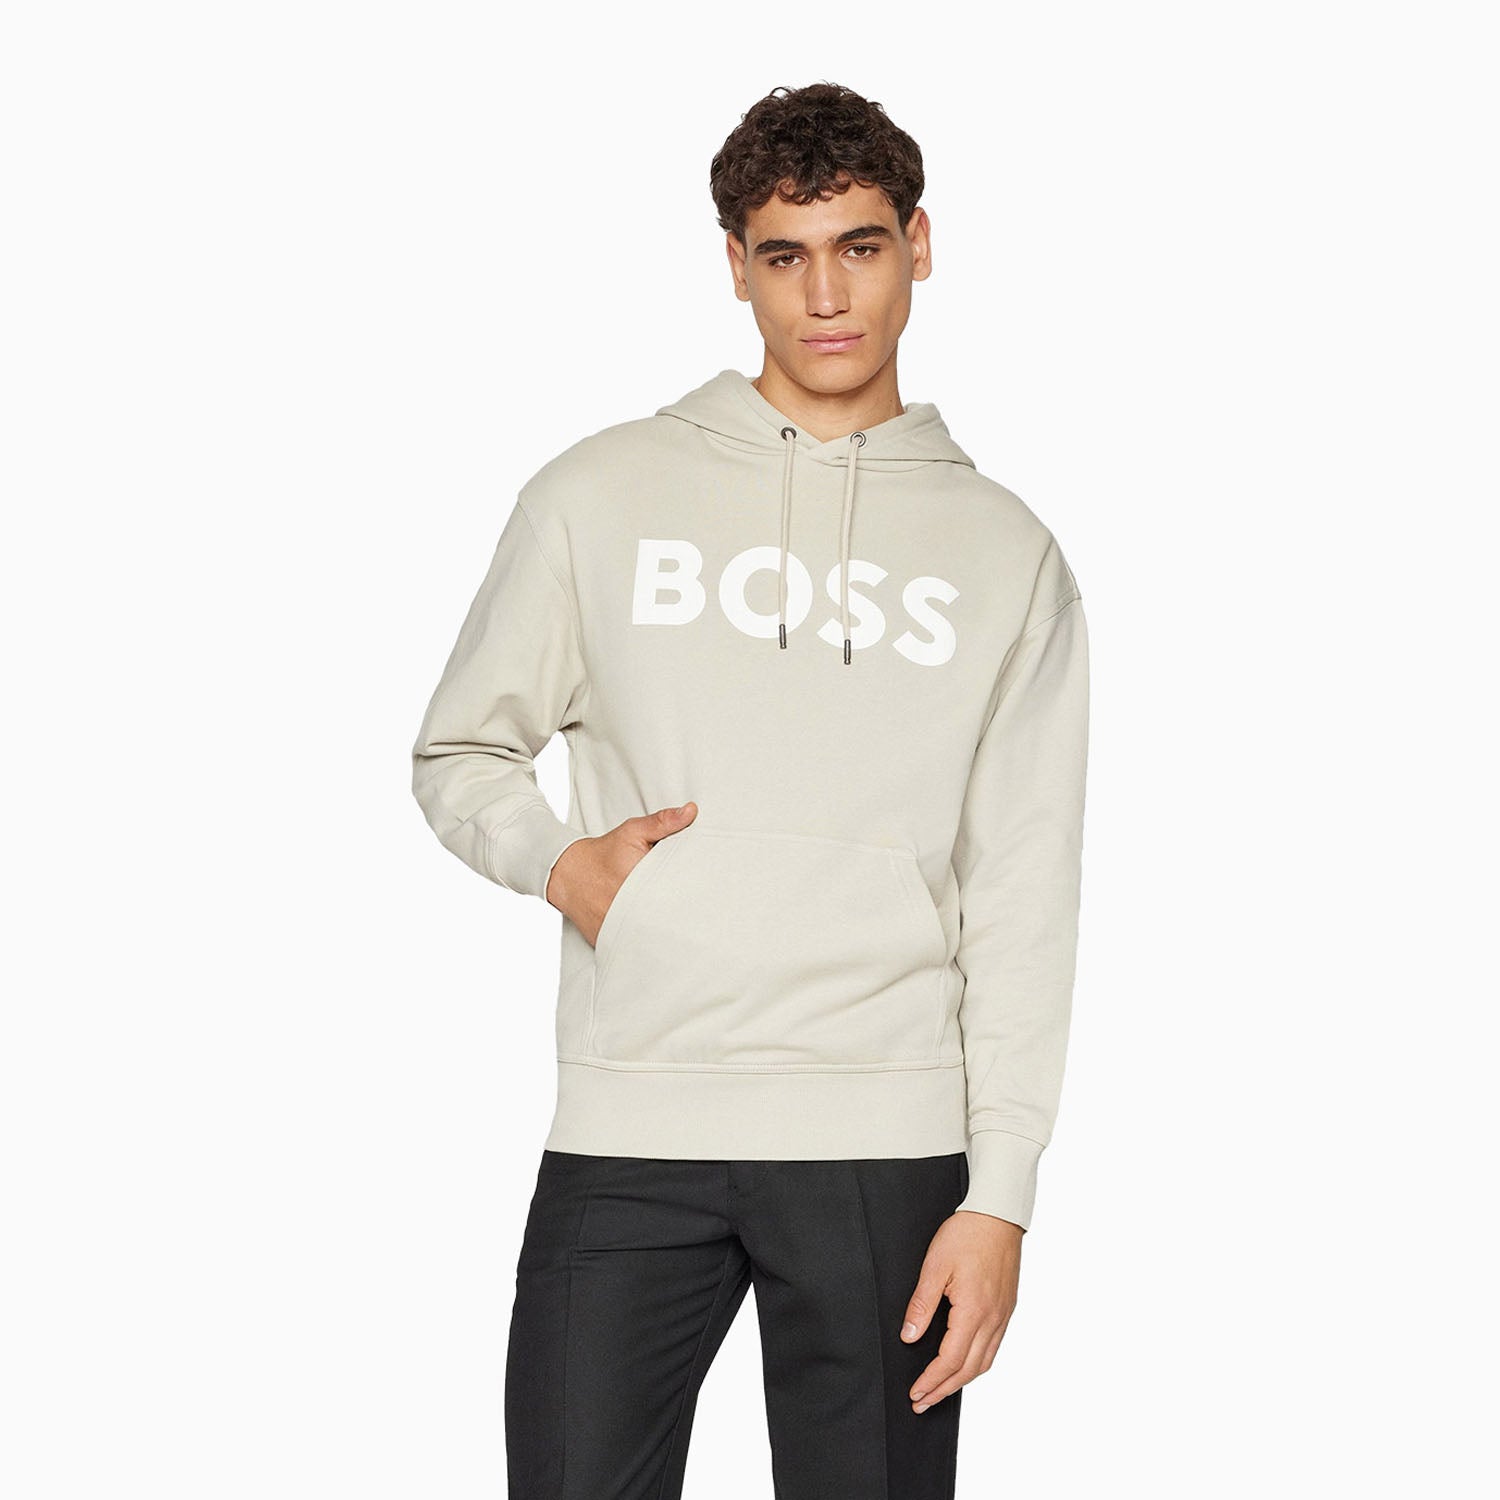 hugo-boss-mens-logo-print-hoodie-in-french-terry-cotton-50487134-271